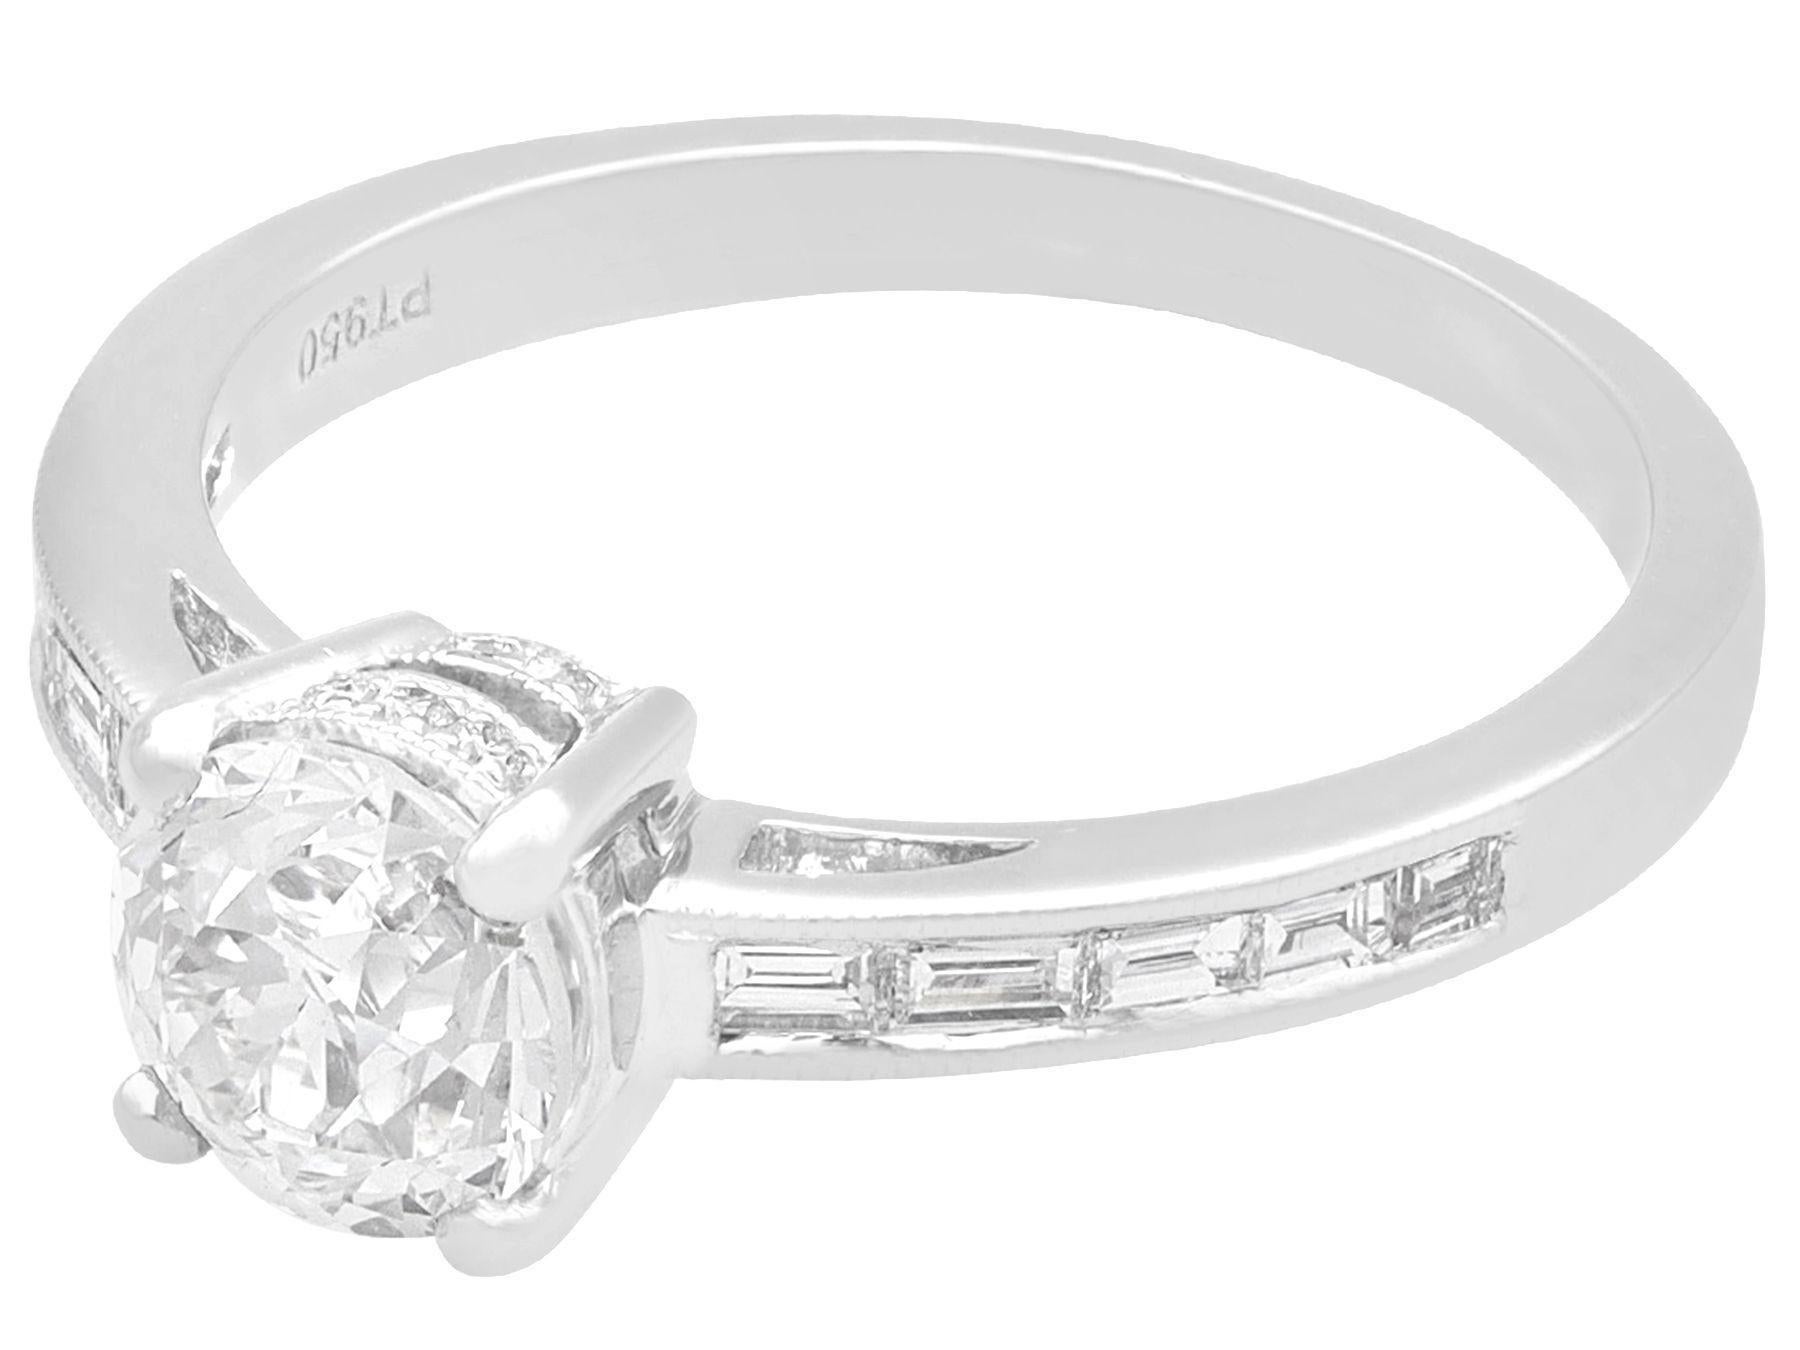 A stunning, fine and impressive 1.78 carat diamond and platinum solitaire ring; part of our diverse engagement ring collections.

This stunning, fine and impressive diamond solitaire has been crafted in platinum.

The pierced decorated, basket style